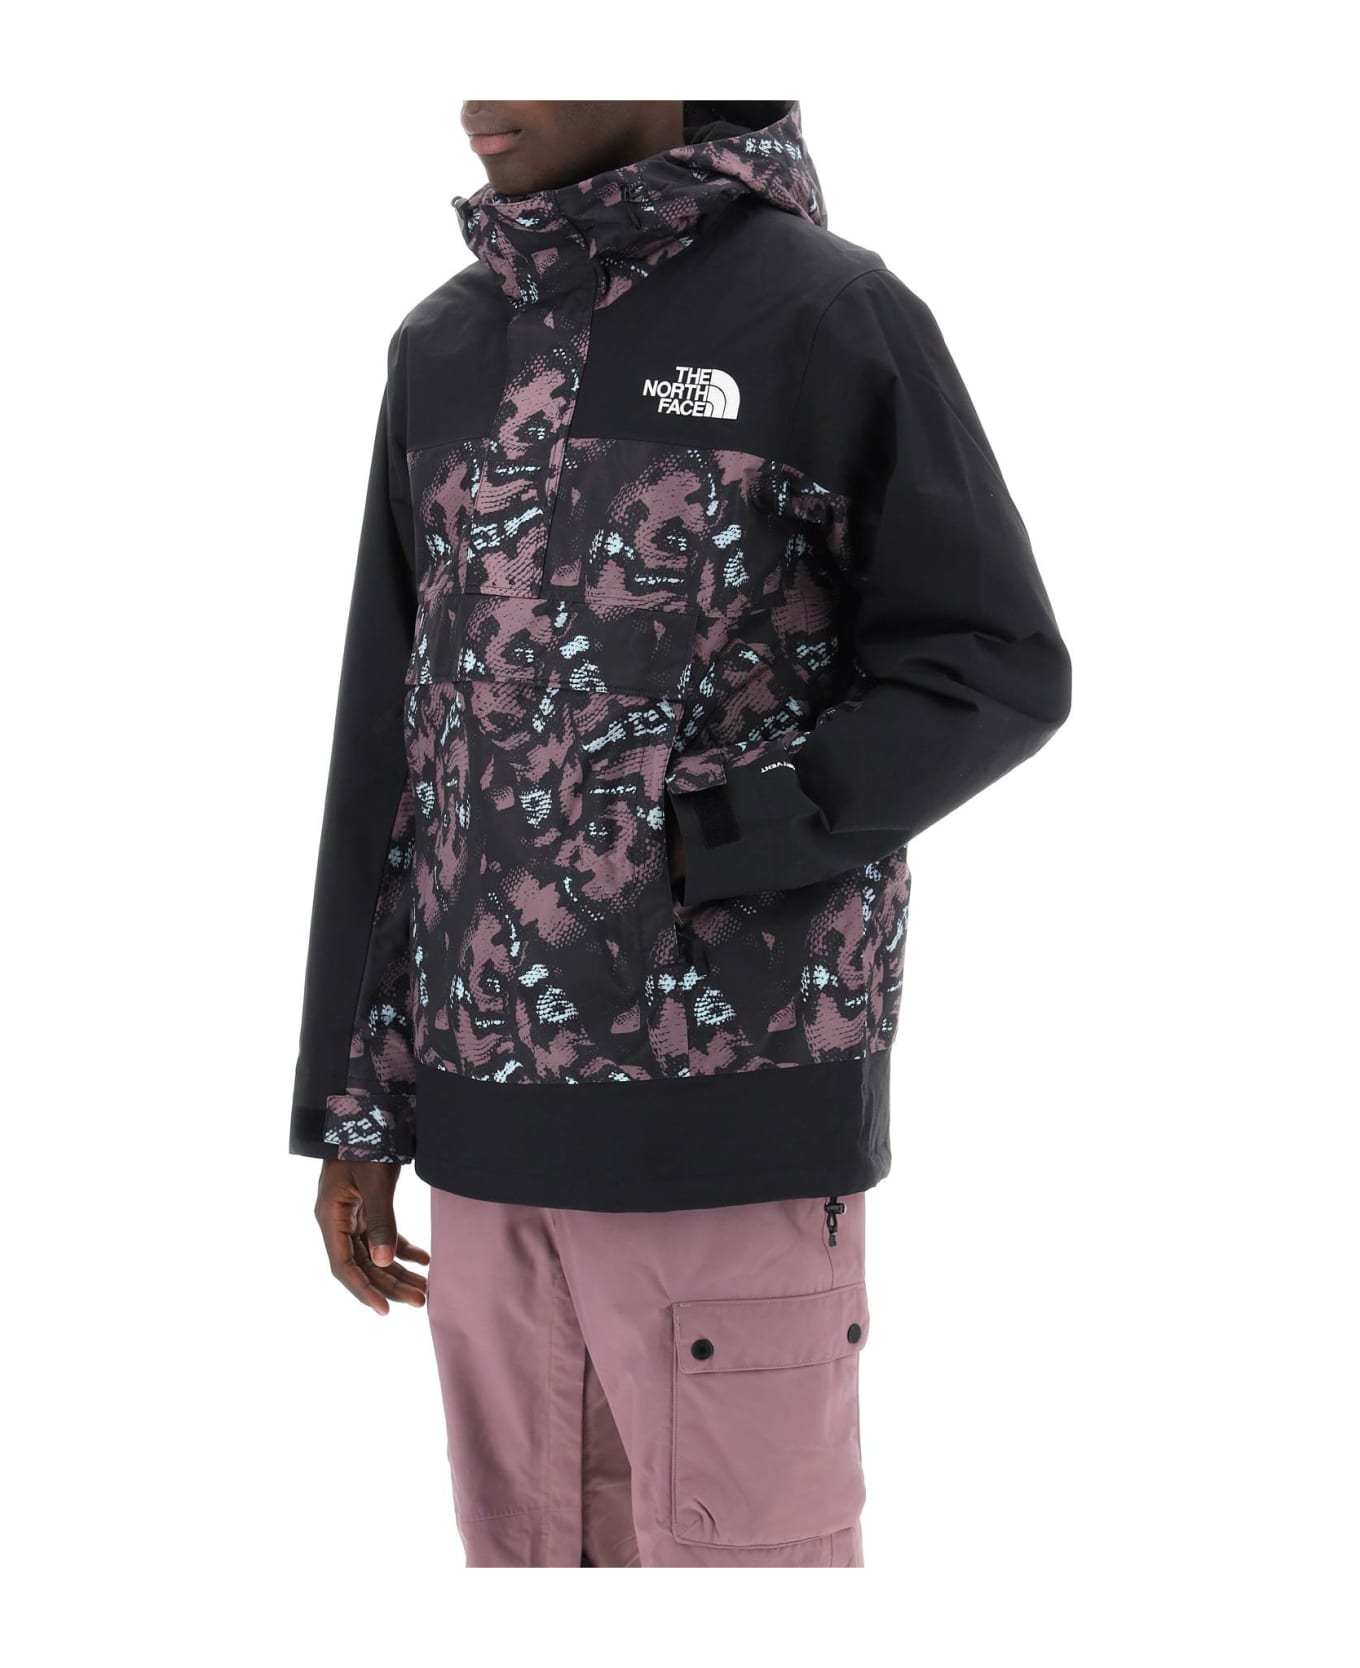 The North Face Driftview Ski Anorak - FAWN GREY SNAKE CHARMER (Black)